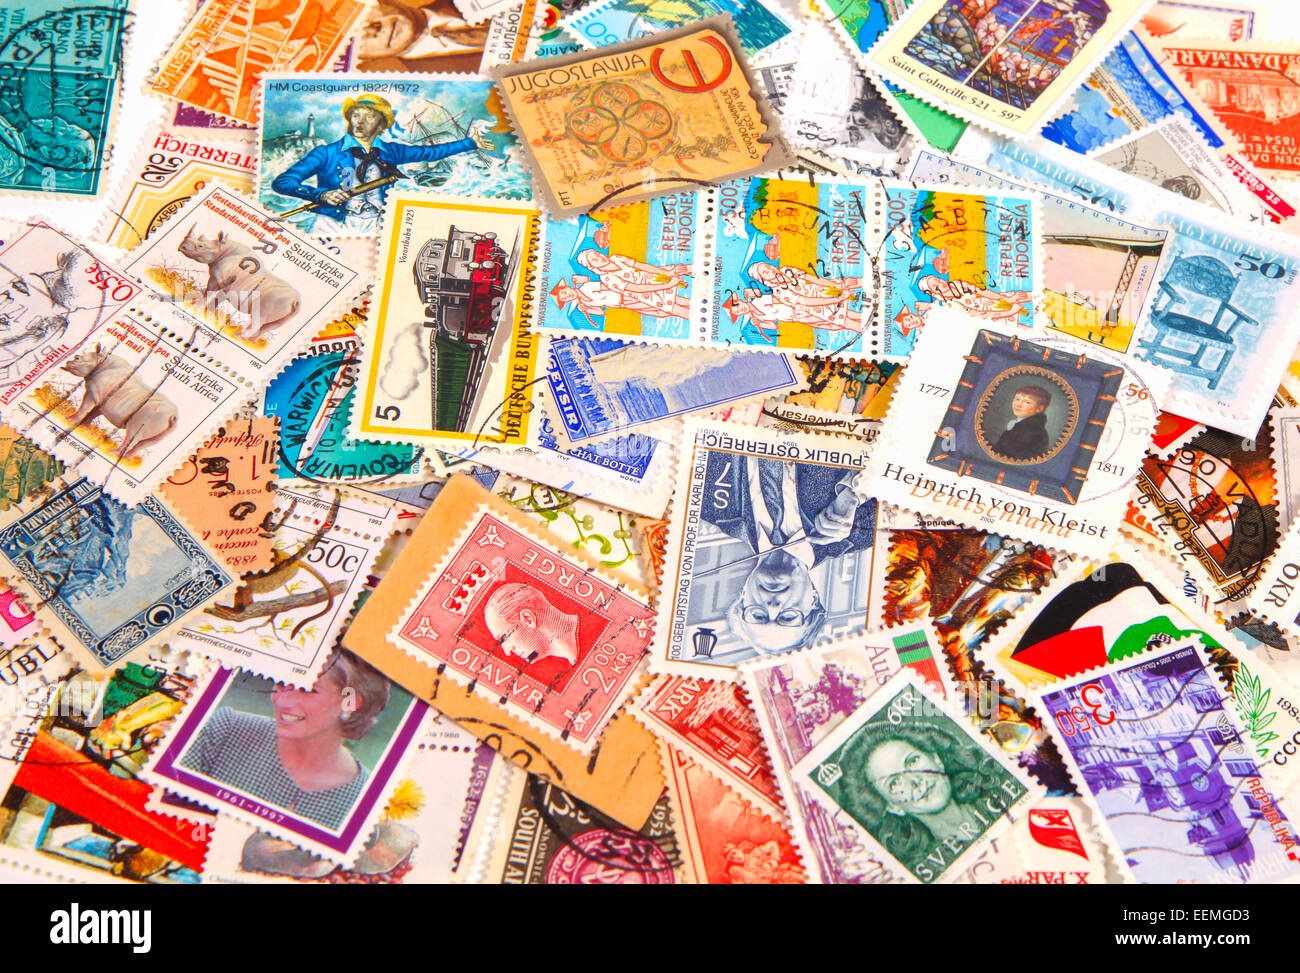 Collection of vintage international postage stamps Stock Photo